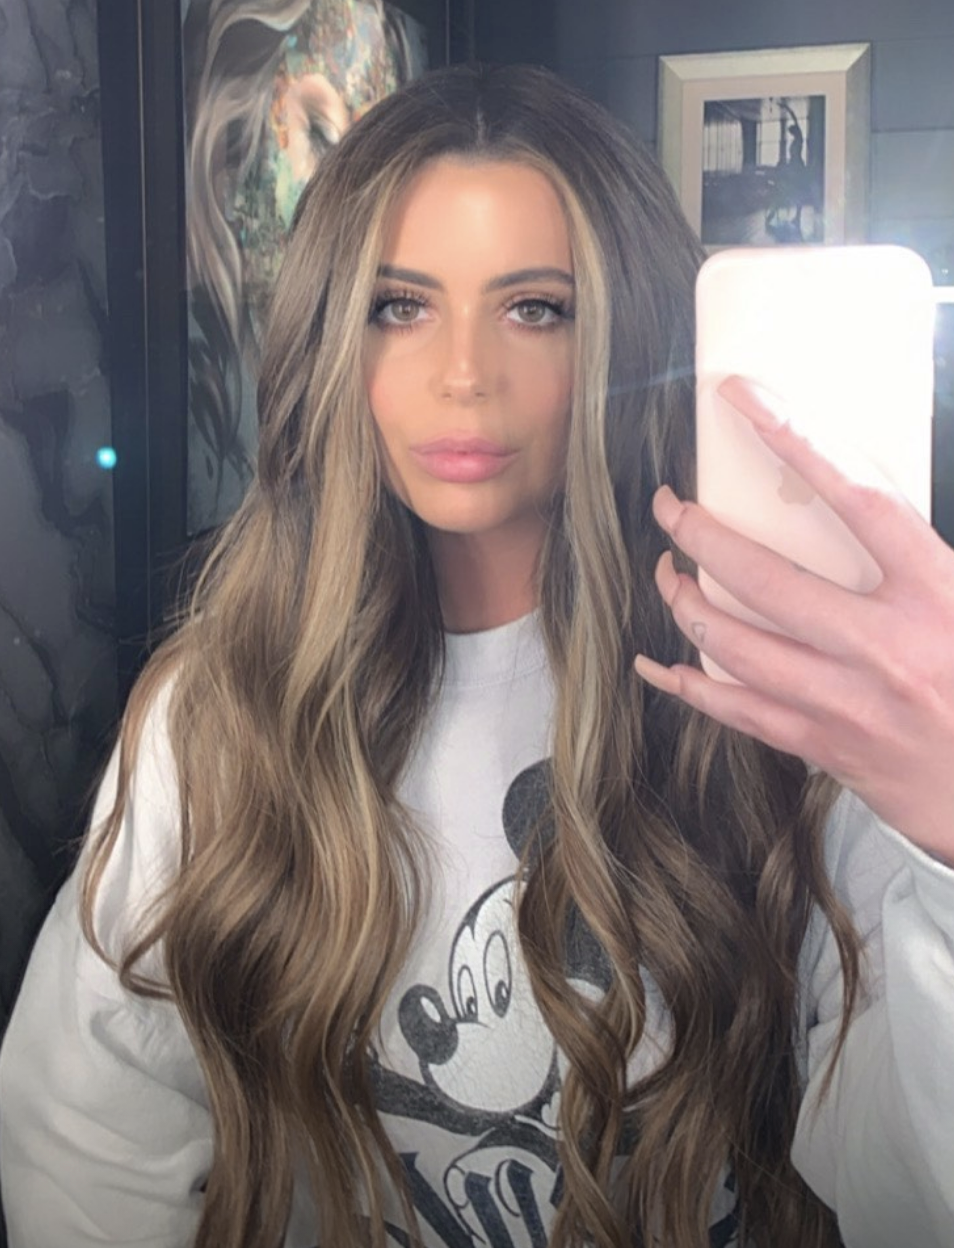 <p>Brielle Biermann posted this selfie on her Instagram Story on Jan. 6, 2020, after she'd started getting injections to <a href="https://www.wonderwall.com/news/brielle-biermann-has-new-look-after-dissolving-her-lip-fillers-3021945.article">dissolve her lip fillers</a>, and her pout already looked noticeably less plump than usual. A few days earlier, she shared on Instagram that she wanted to change up her look. "Dissolved my lips yesterday...gonna look like 18 year old Brielle again soon," she captioned an image of her still-puffy lips on her Instagram Story. "2020 new year new me!"</p>